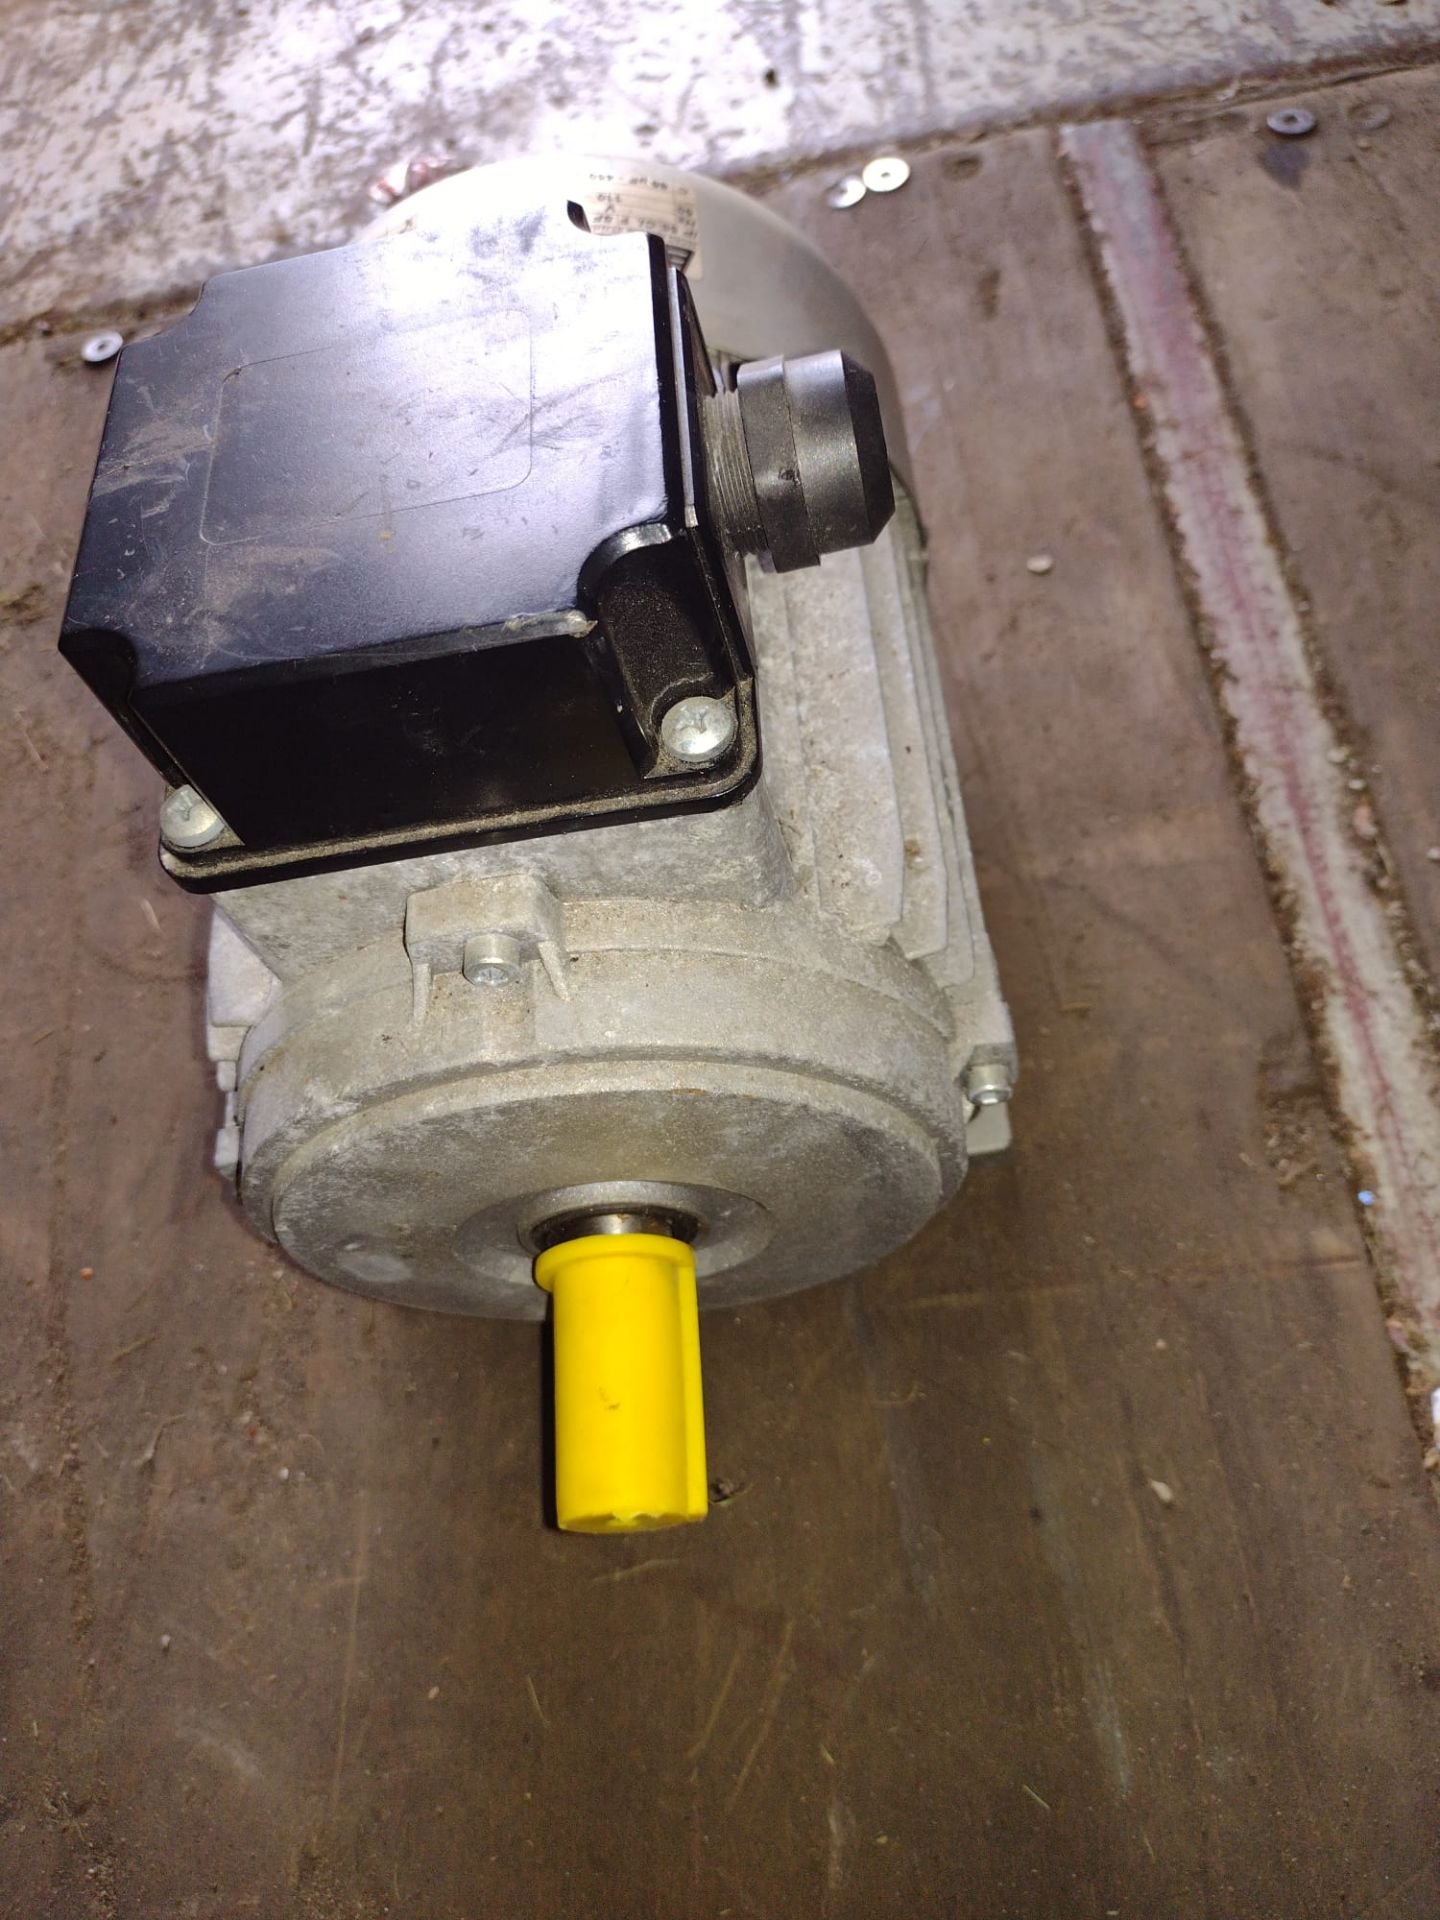 4x 110 motors some immer for scaffolding hoists untested but in good condition 1 or 2 *NO VAT* - Image 8 of 10